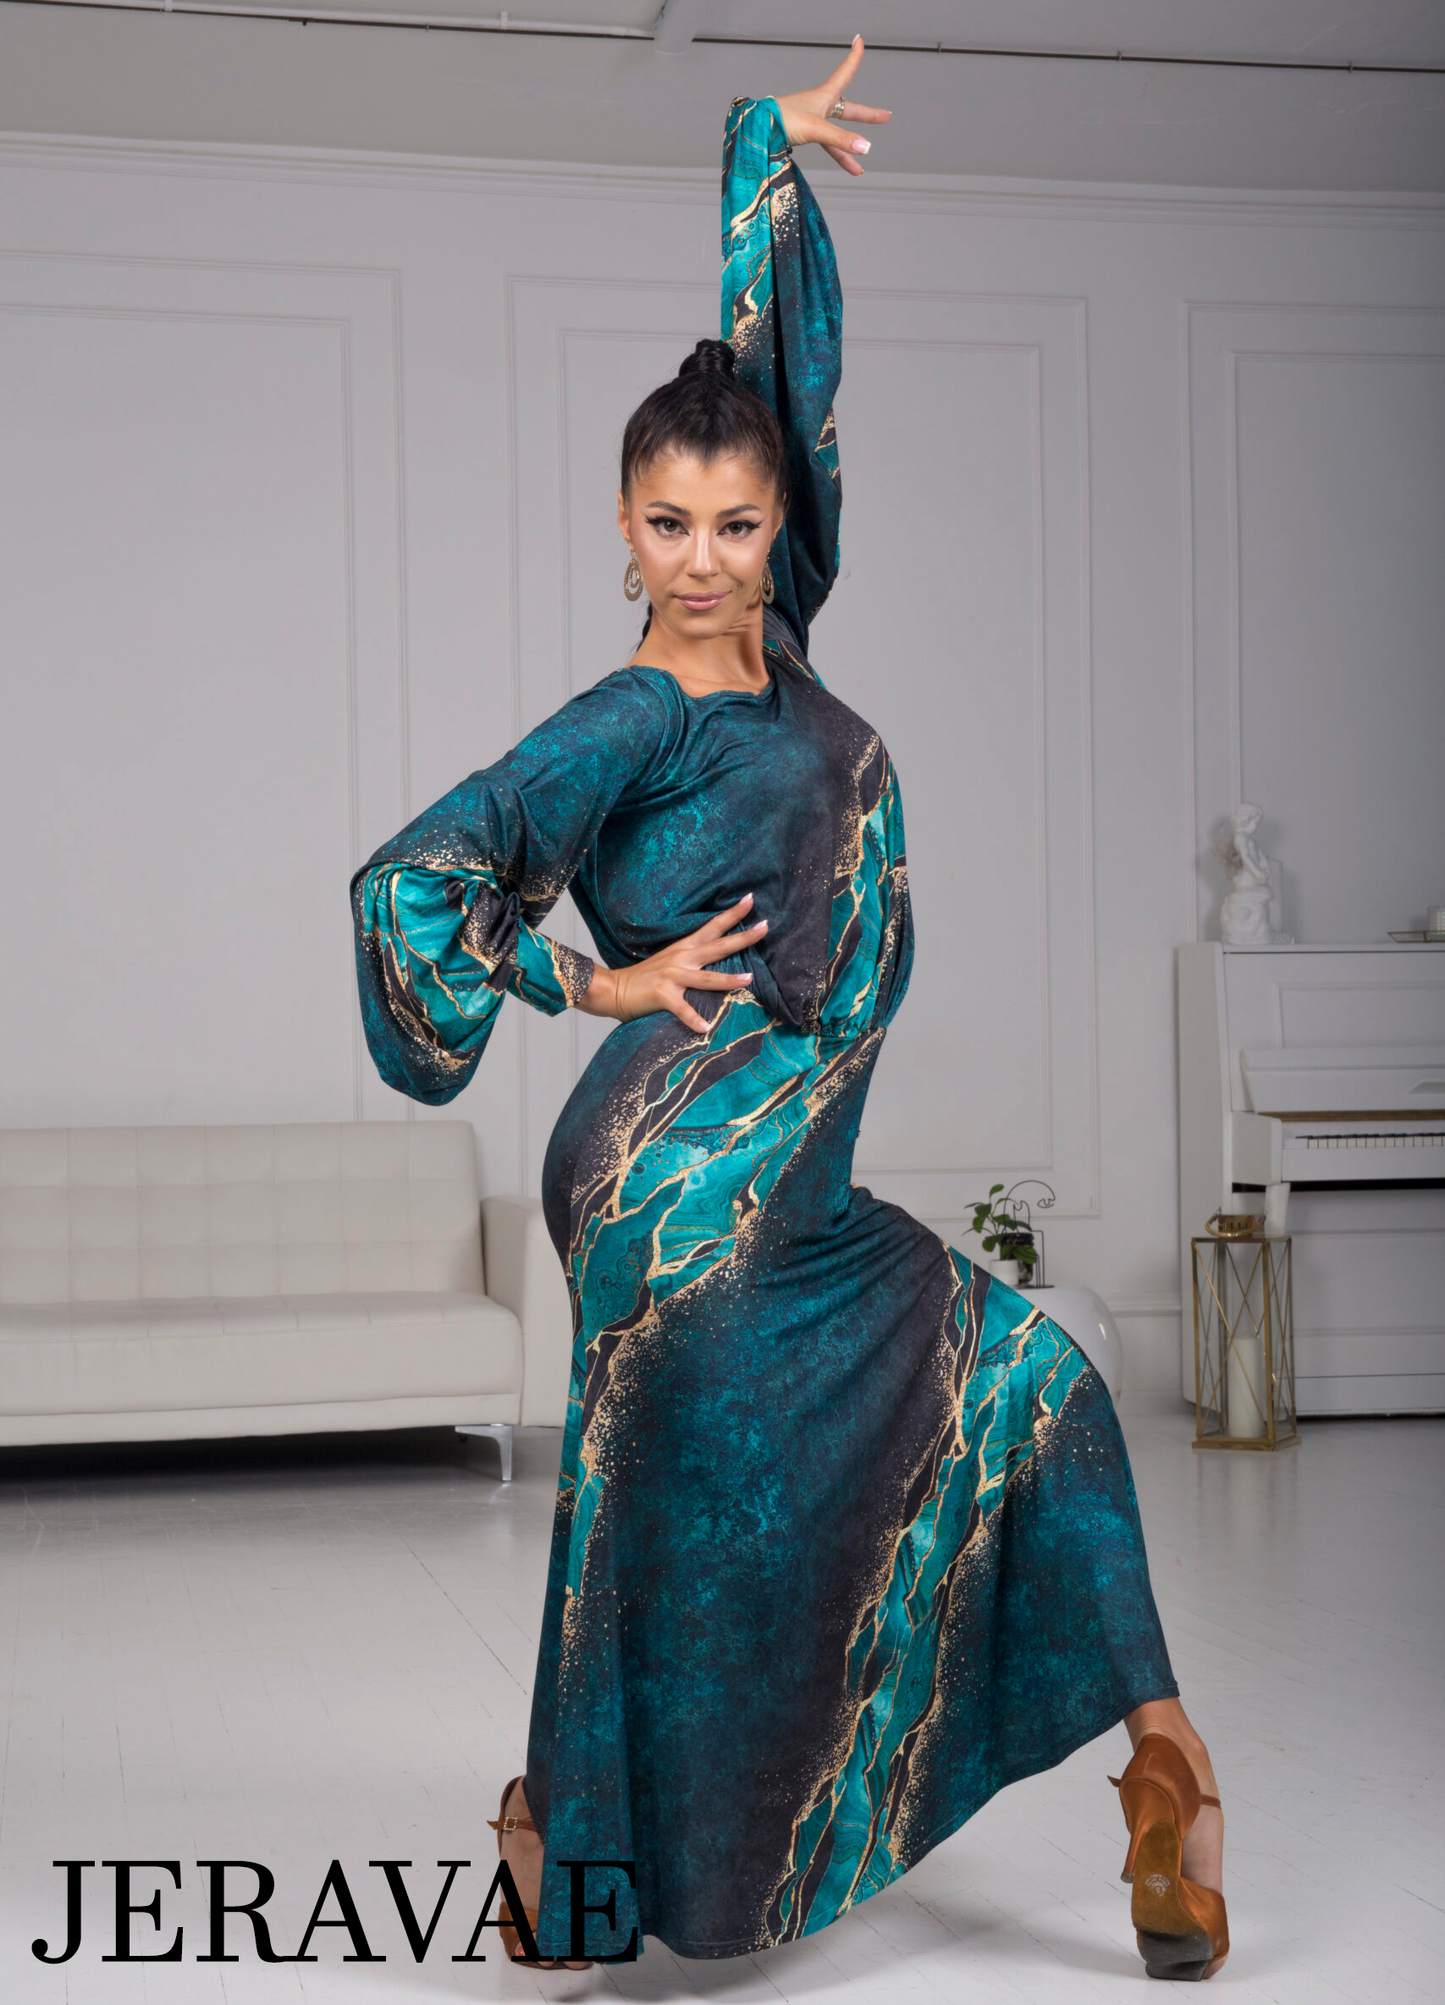 Body Positive Senga Dancewear TRIBAL Turquoise and Gold Pattern Ballroom Practice Dress with Lantern Sleeves and Elastic Waistline in Sizes XL-4XL PRA 968 in Stock